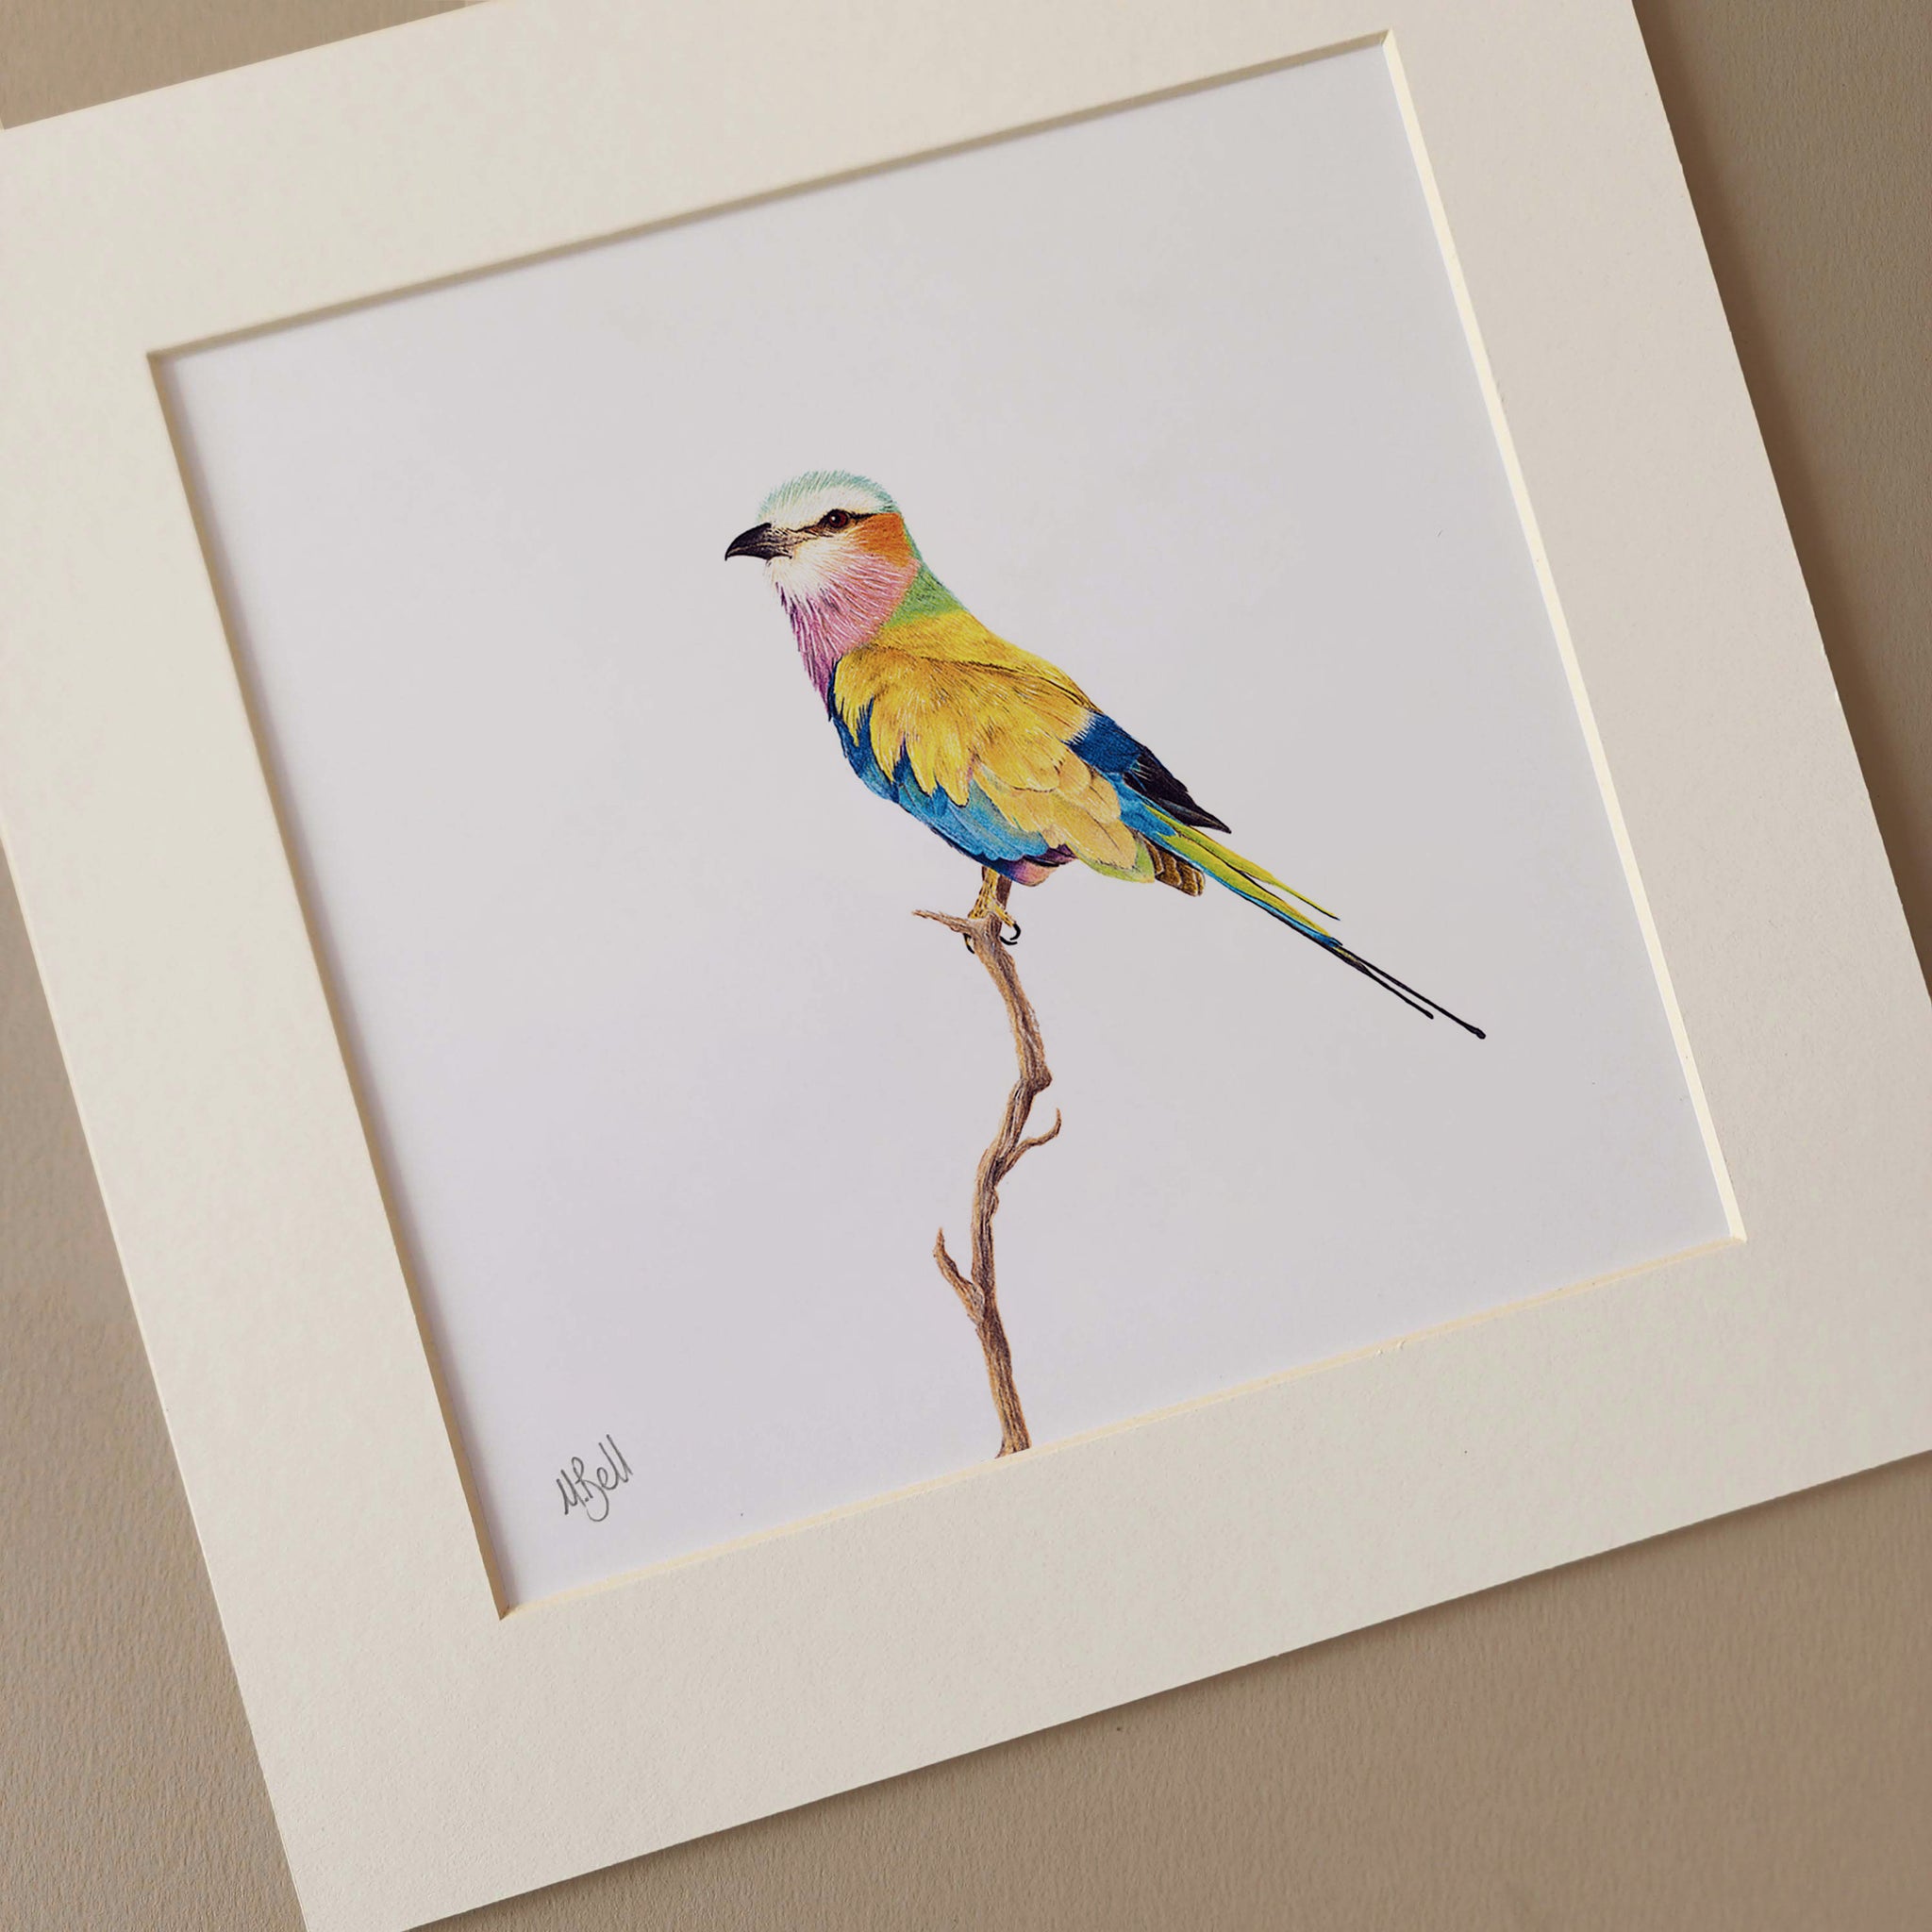 Lilac Breasted Roller drawing by Matthew Bell